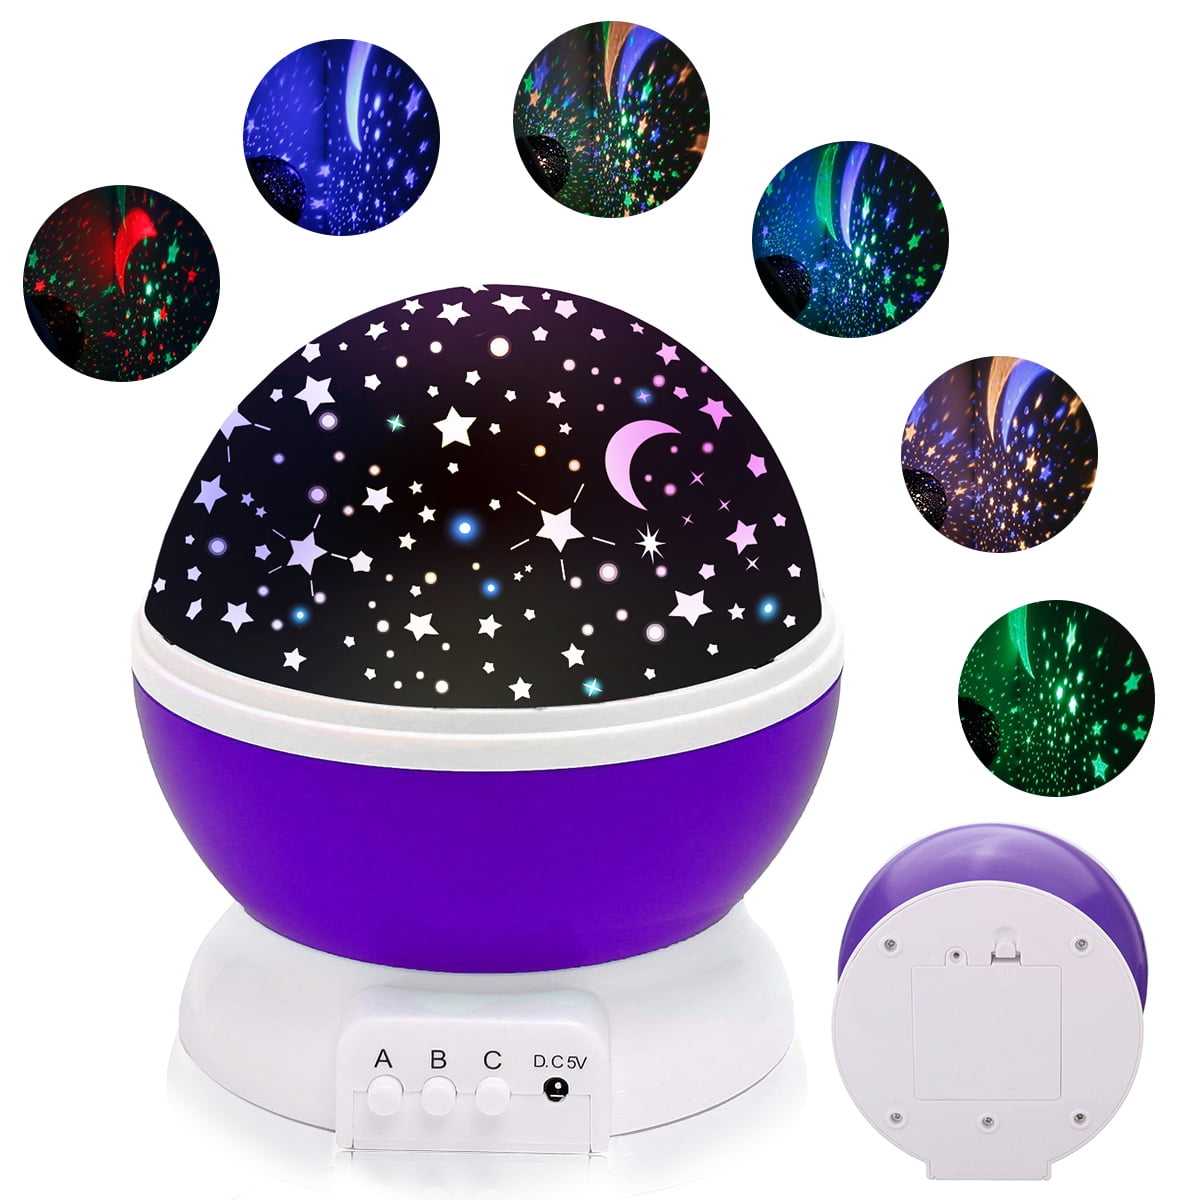 Details about   Rotating LED Light Projector Star Moon Sky Night Mood Ocean Birthday Lamp Gift 